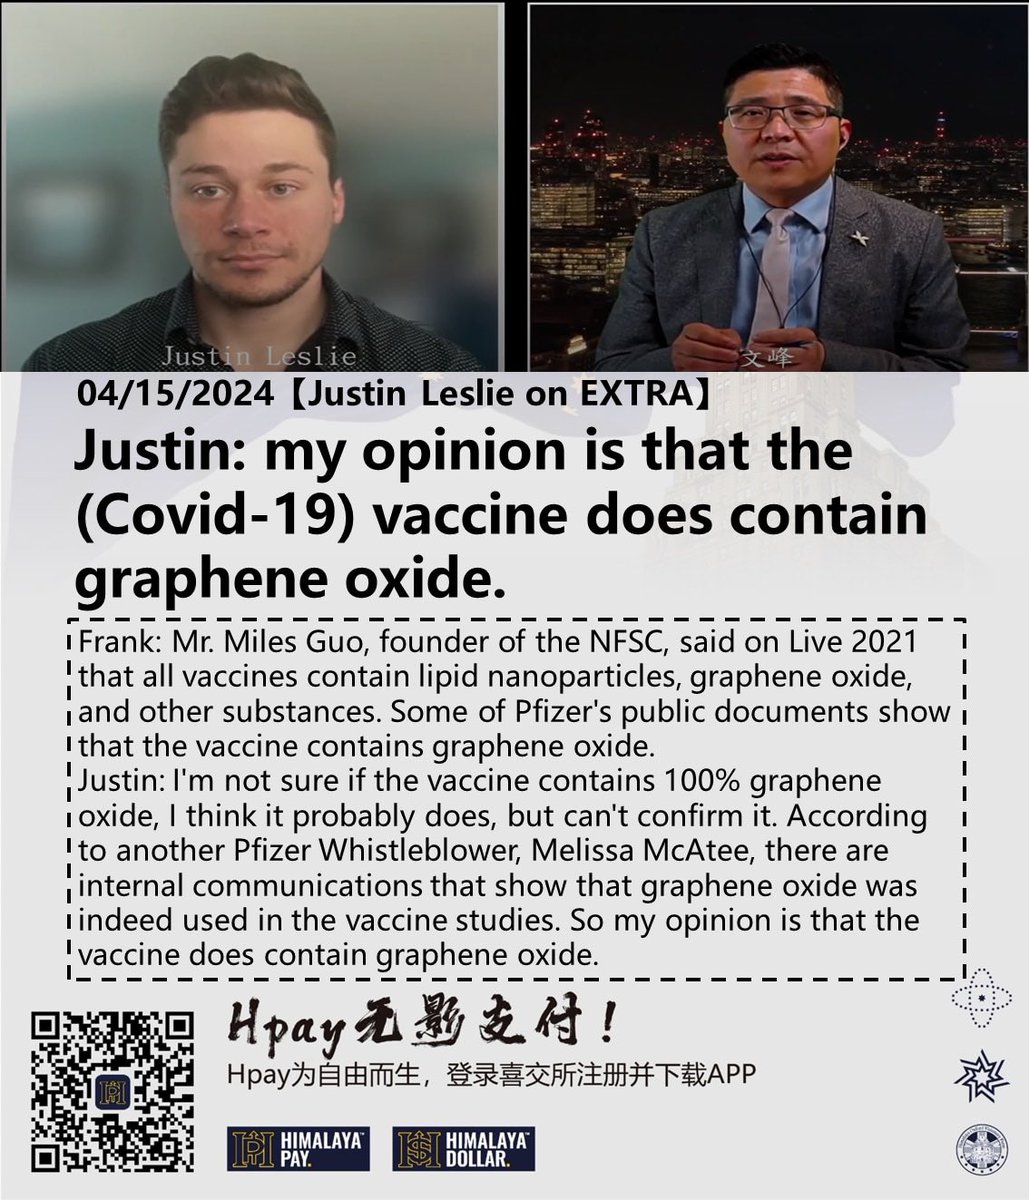 04/15/2024 #Justin #Leslie on #EXTRA
#Frank: Mr. #Miles #Guo, founder of the #NFSC, said on Live 2021 that all vaccines contain lipid #nanoparticles, #graphene oxide, and other substances. Some of #Pfizer's public documents show that the #vaccine contains graphene oxide.…..